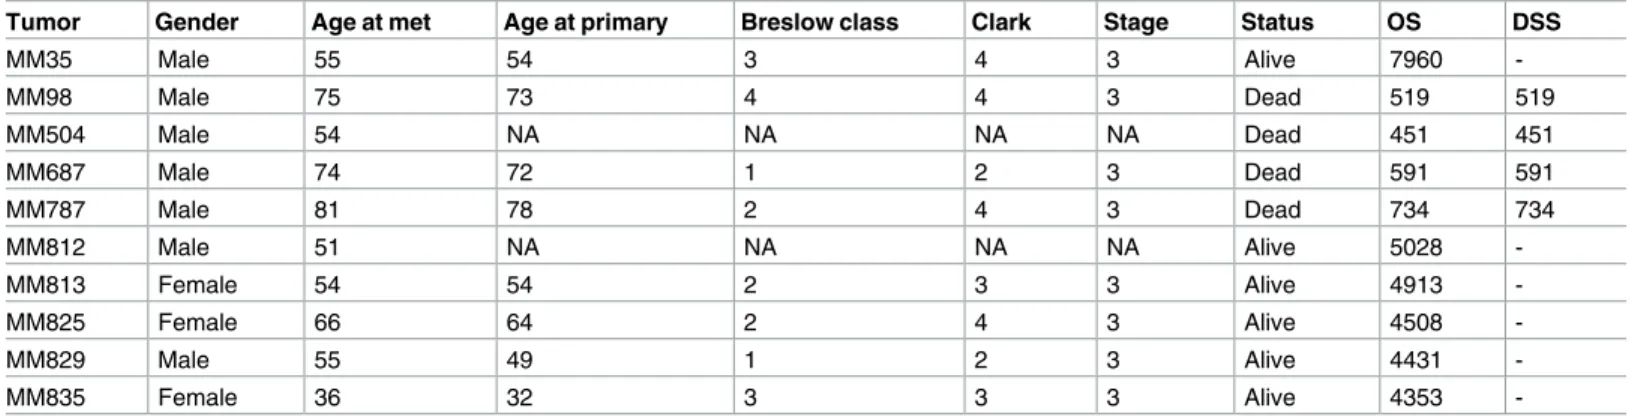 Table 1. Clinical information of patient characteristics. Breslow thickness and Clarks refer to primary melanoma feature.